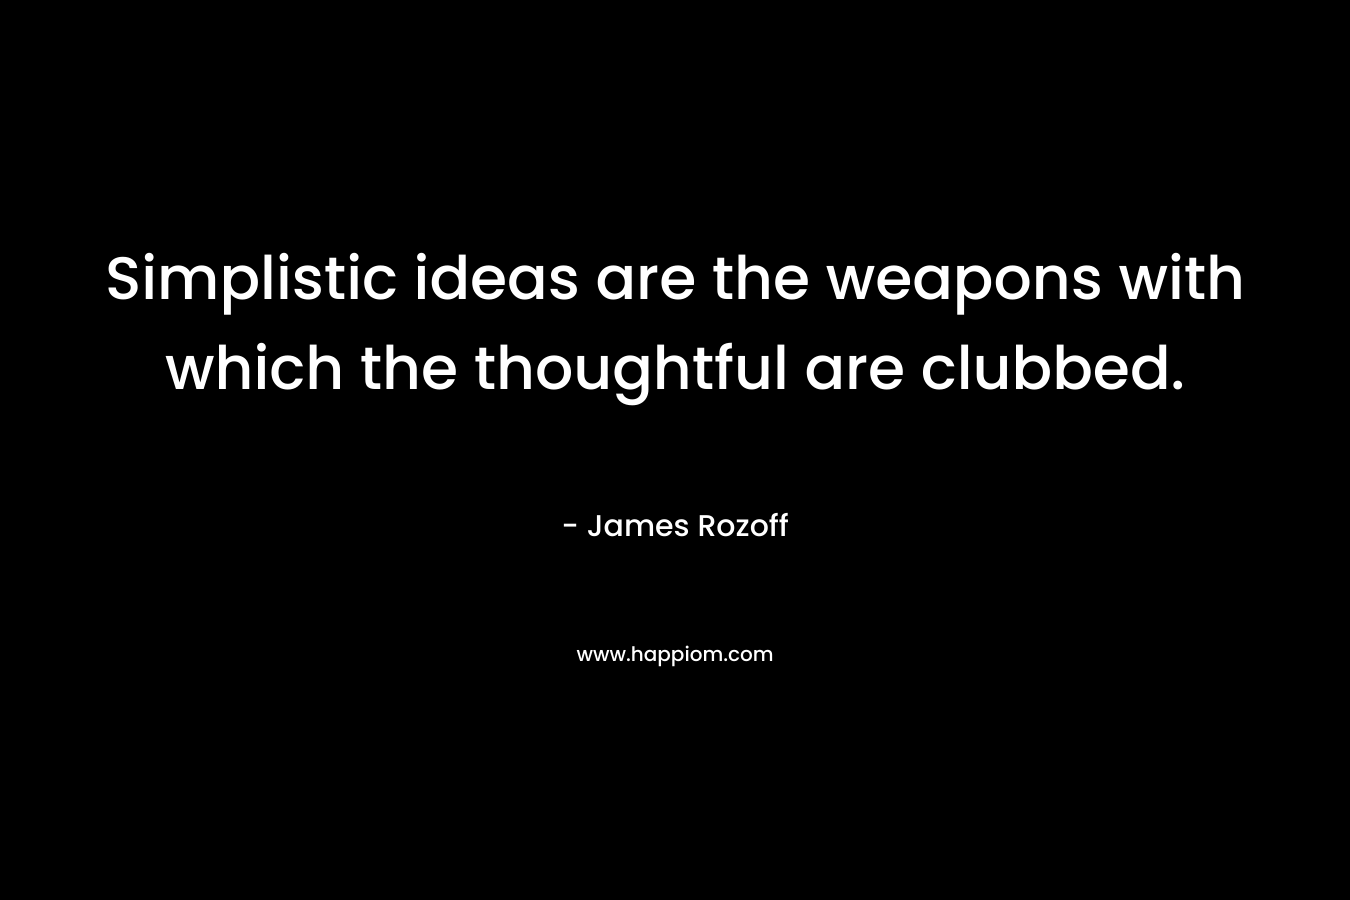 Simplistic ideas are the weapons with which the thoughtful are clubbed.